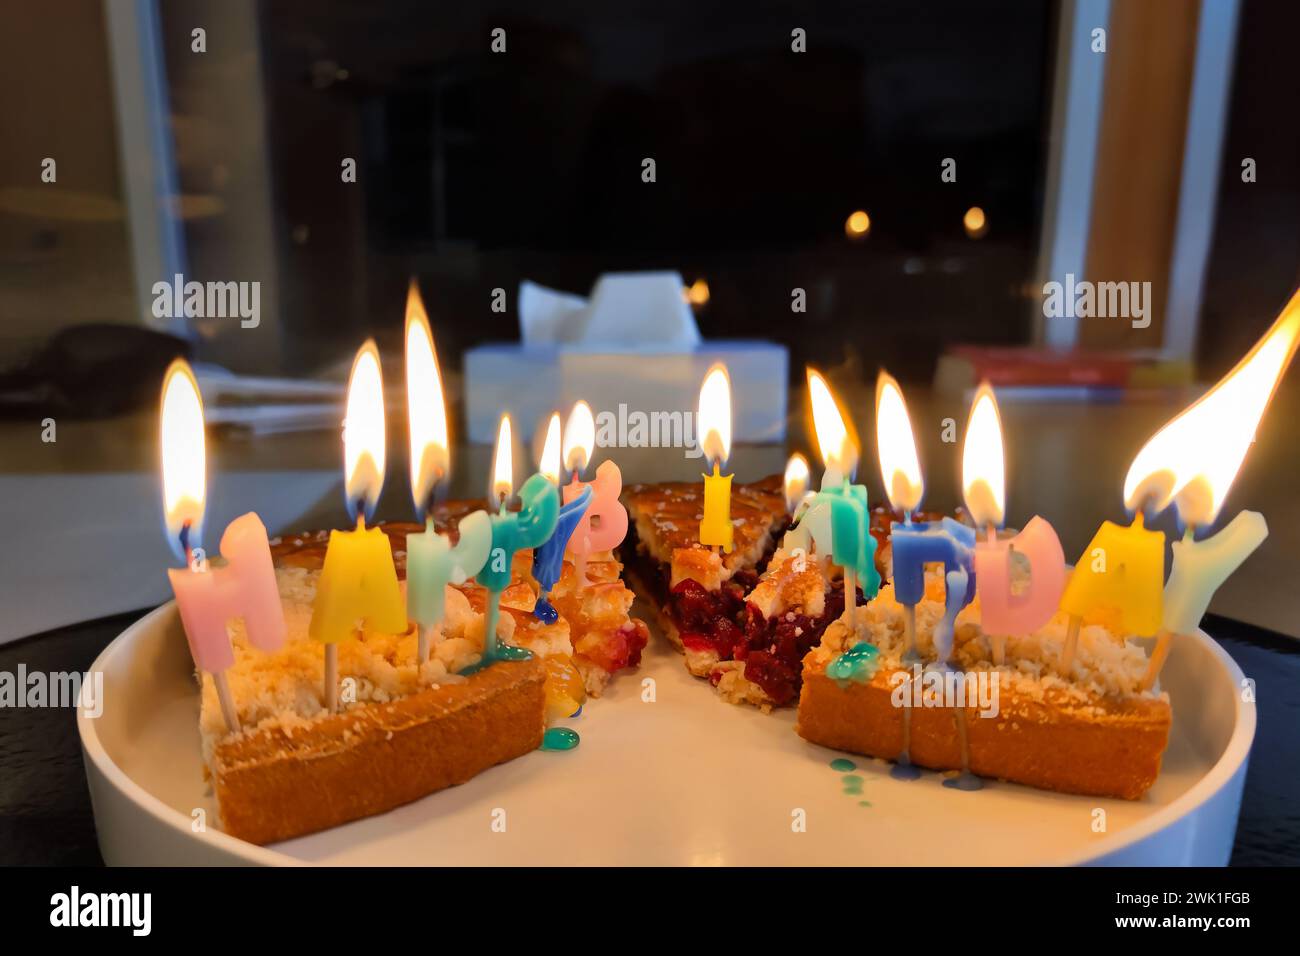 Messy Birthday Cakes Colorful colourful burning melting Happy Birthday Candles on slices of cake displayed on a plate making a happy birthday mess. Stock Photo